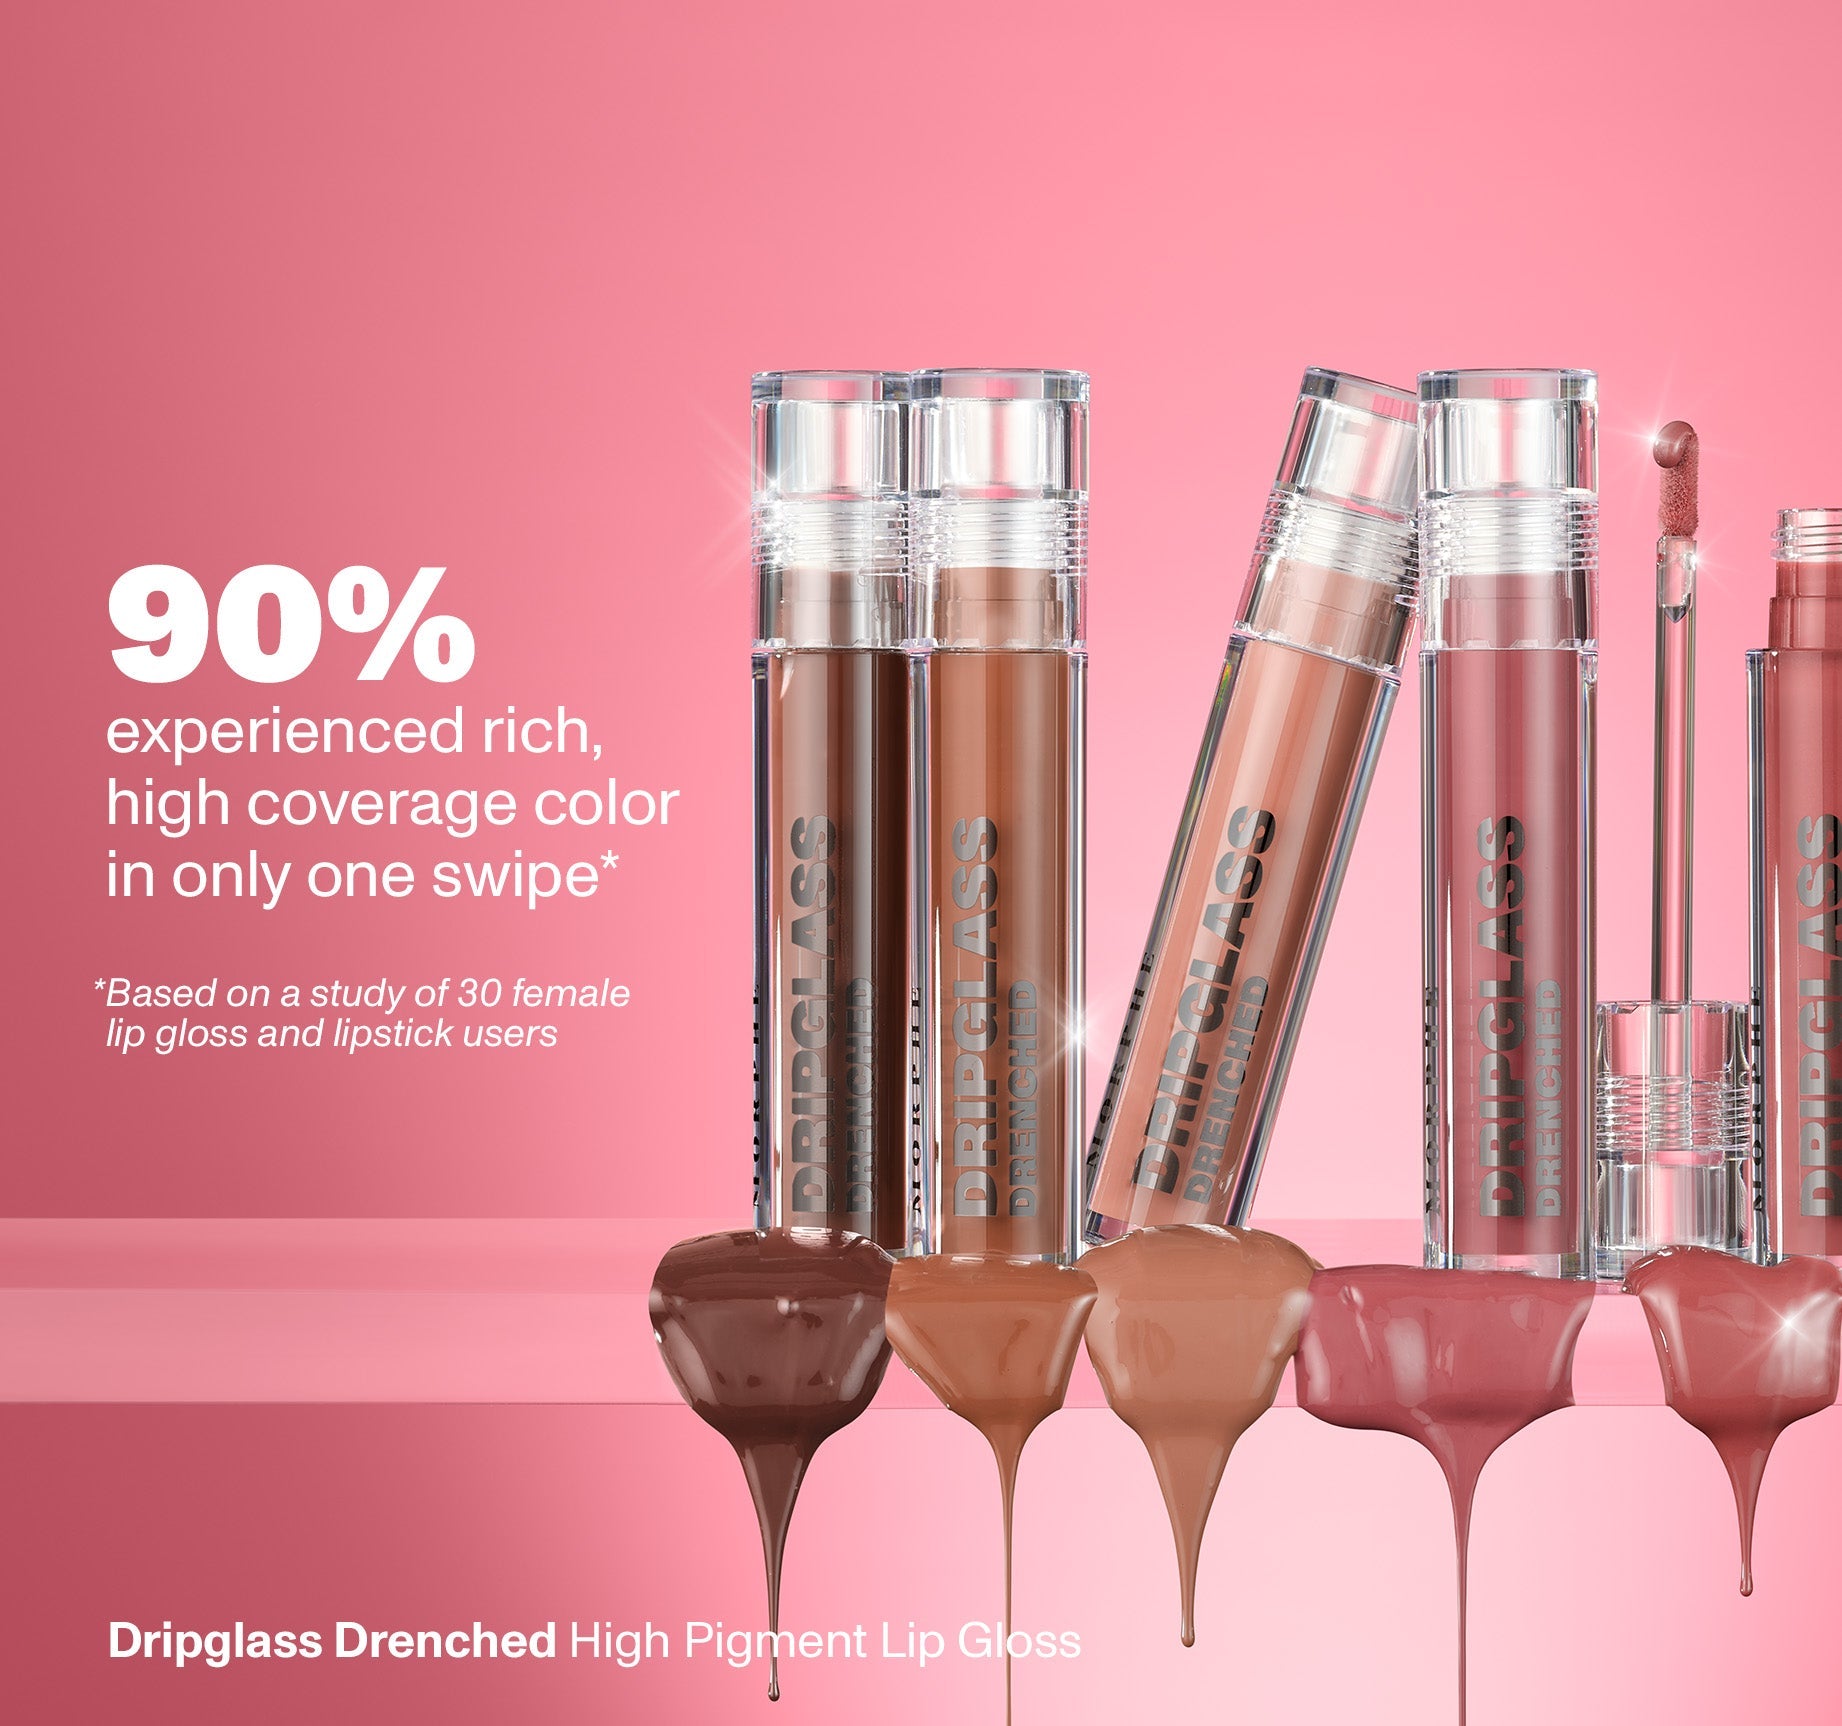 Dripglass Drenched High Pigment Lip Gloss - Deep Brick - Image 8